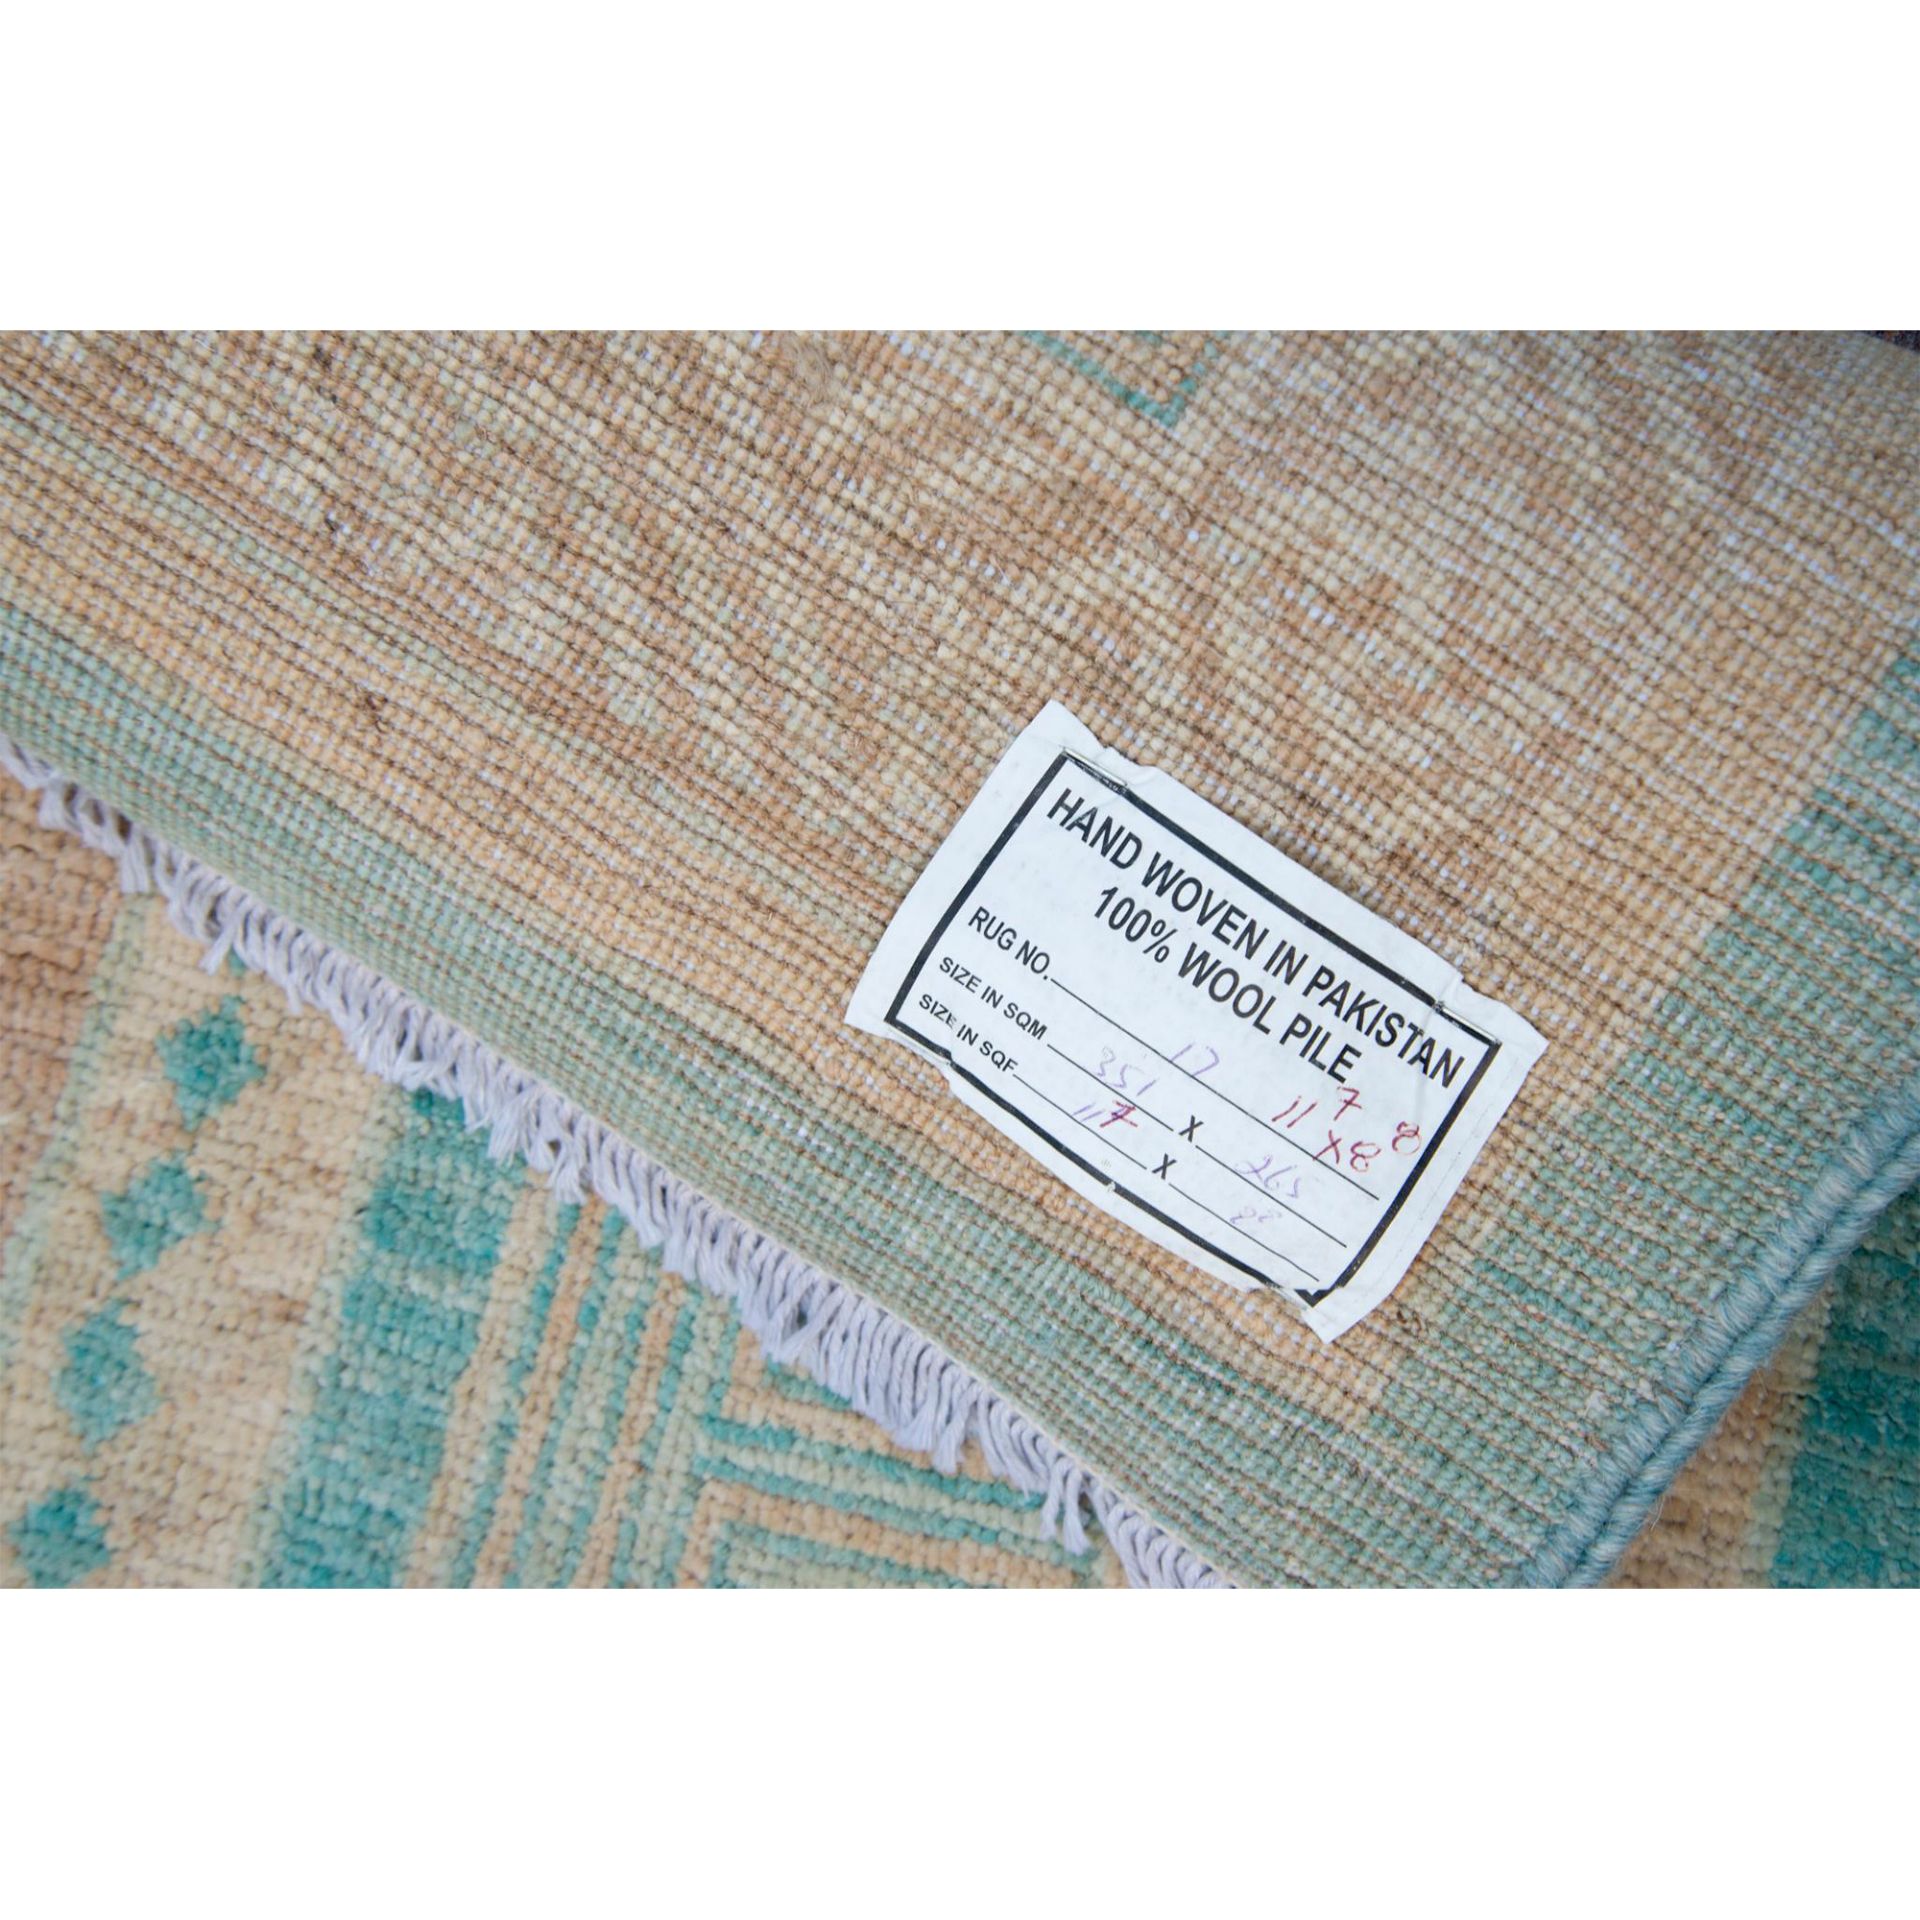 Middle Eastern 100-Percent Hand Woven Wool Rug - Image 3 of 7